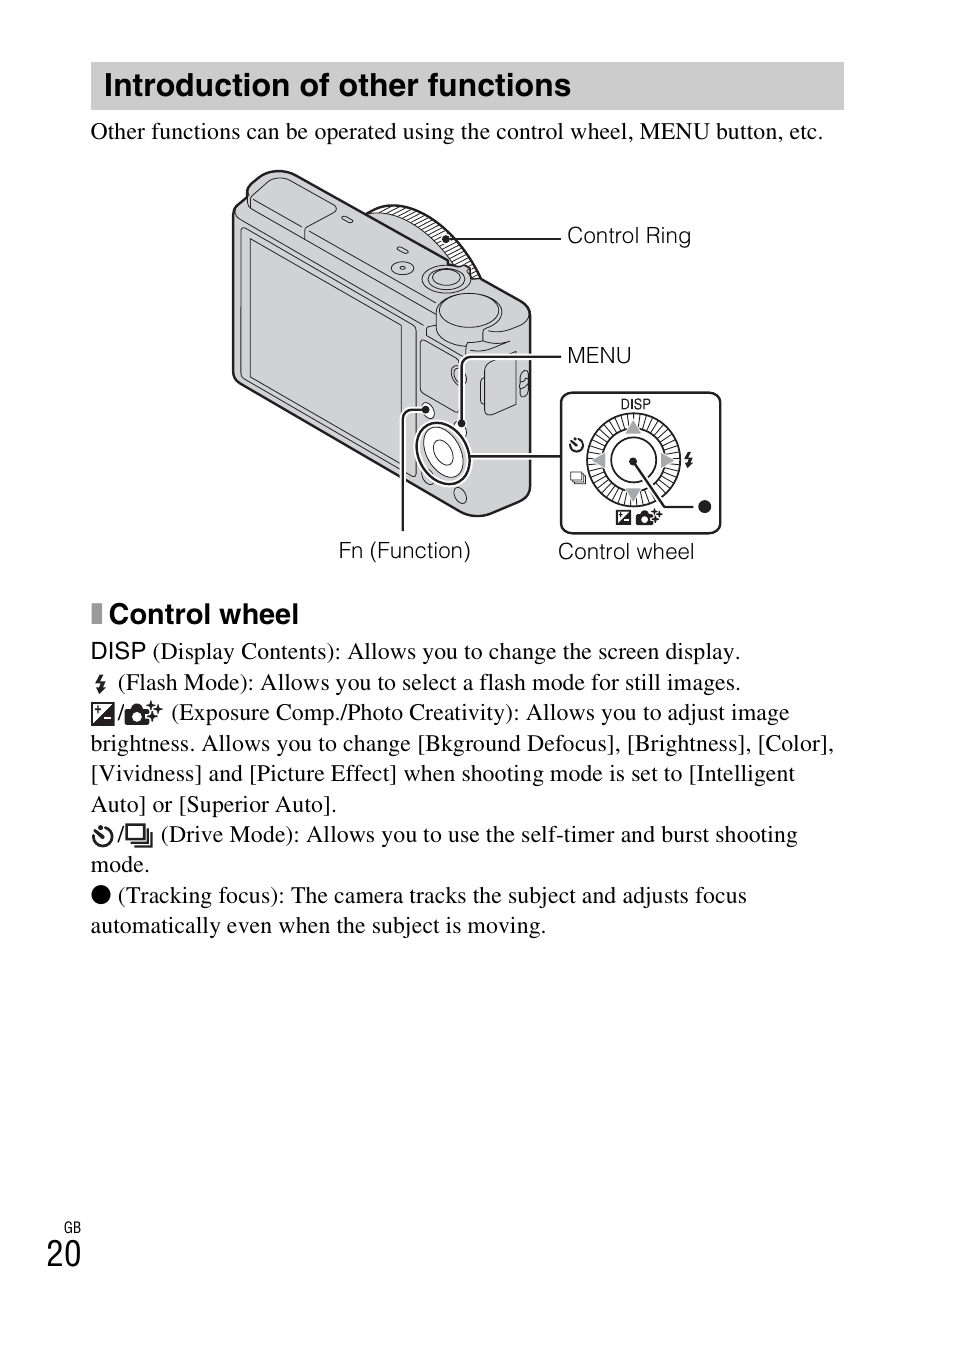 Introduction of other functions, Xcontrol wheel | Sony DSC-RX100 User Manual | Page 20 / 68